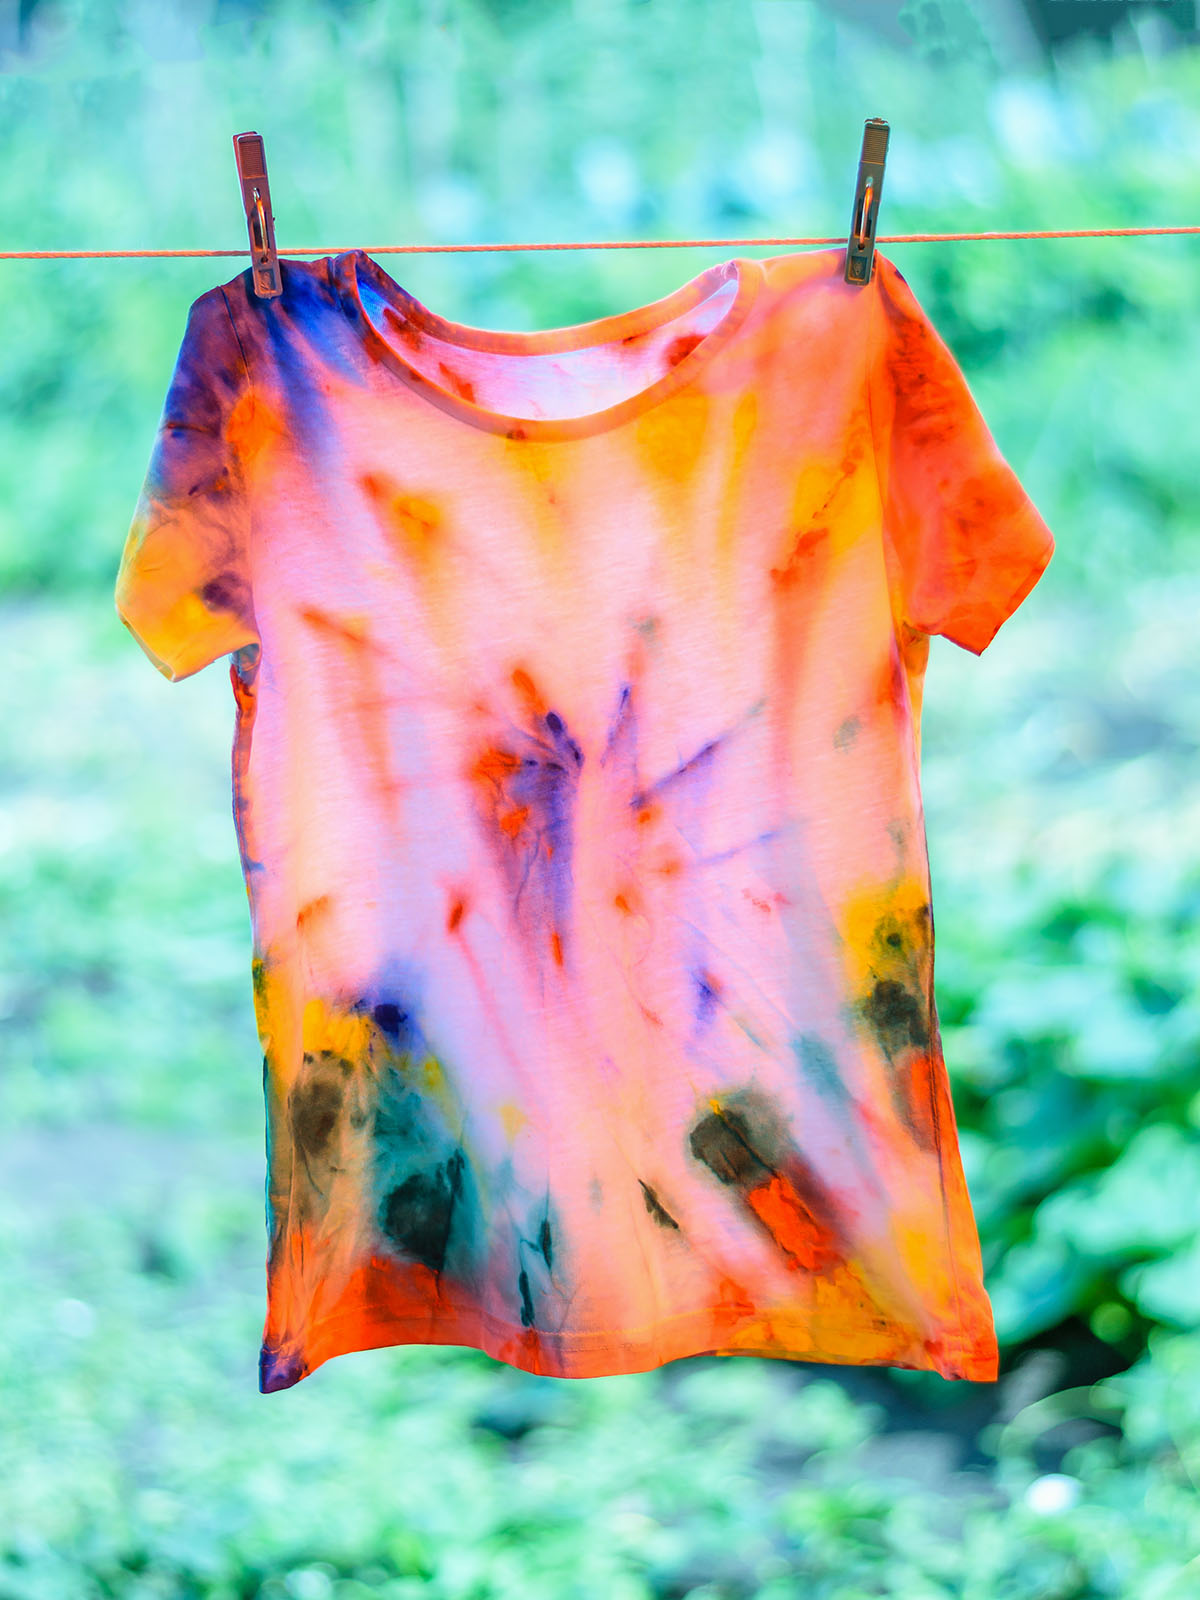 shirt painted in tie dye style is dried on a rope.